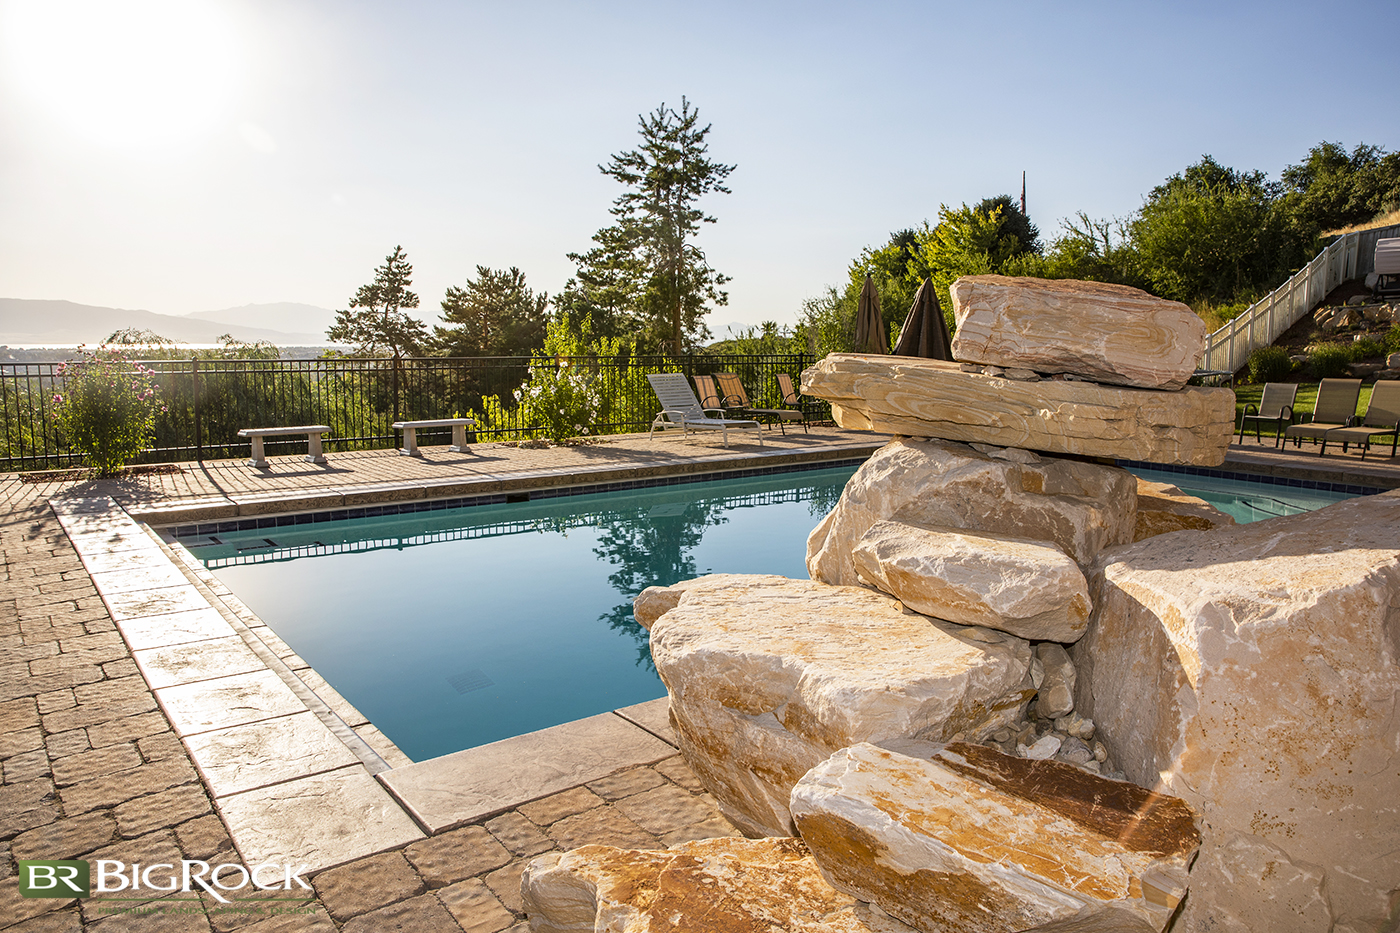 Create a natural swimming hole feel with a pool installation that includes natural rocks and stone. Whether the natural rocks are just decorative or part of a water slide, Big Rock Landscaping can build it.